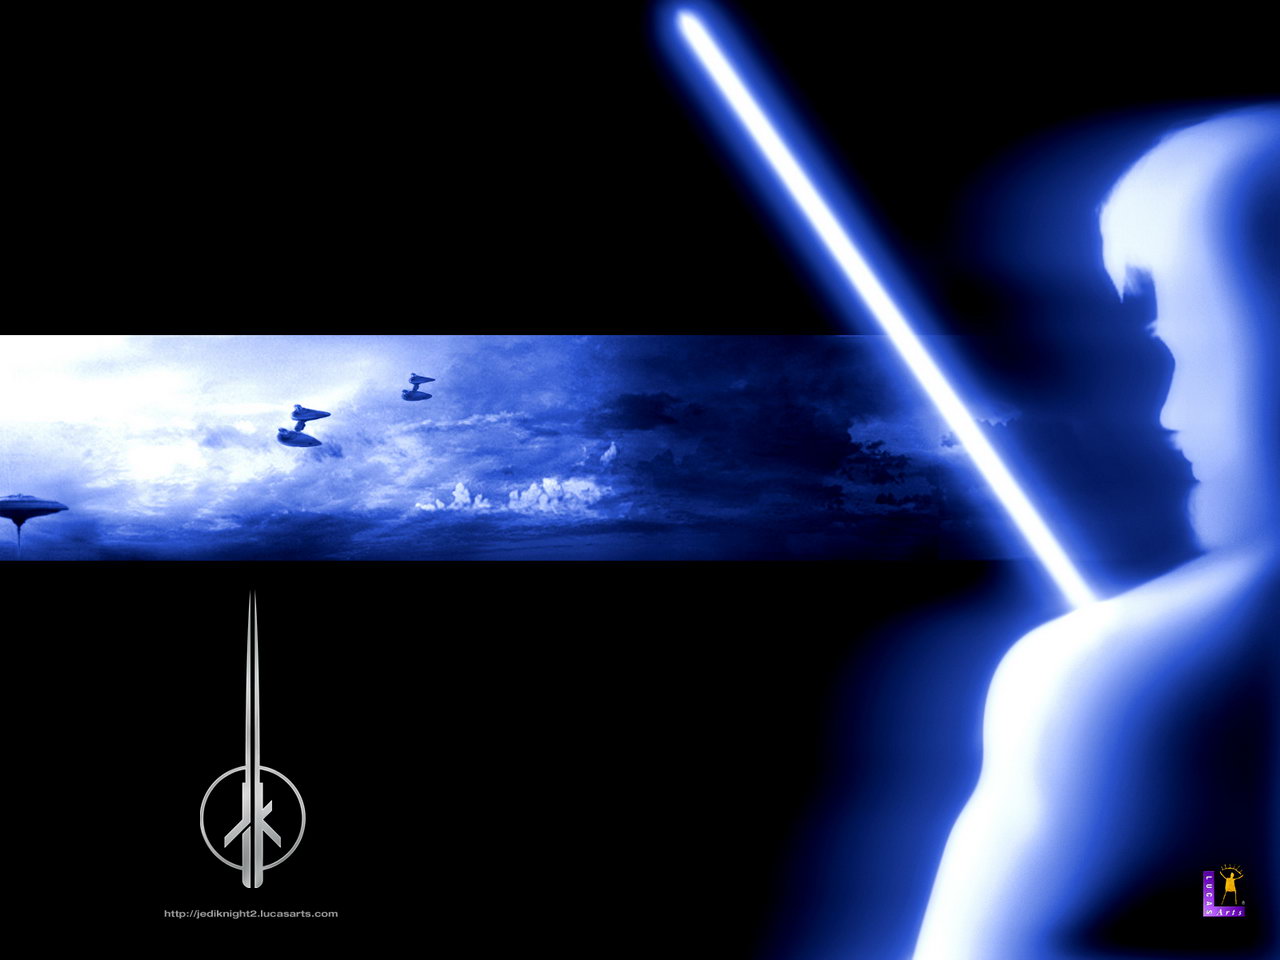  Jedi Knight 2 Jedi Outcast Wallpaper Gallery   Best Game Wallpapers